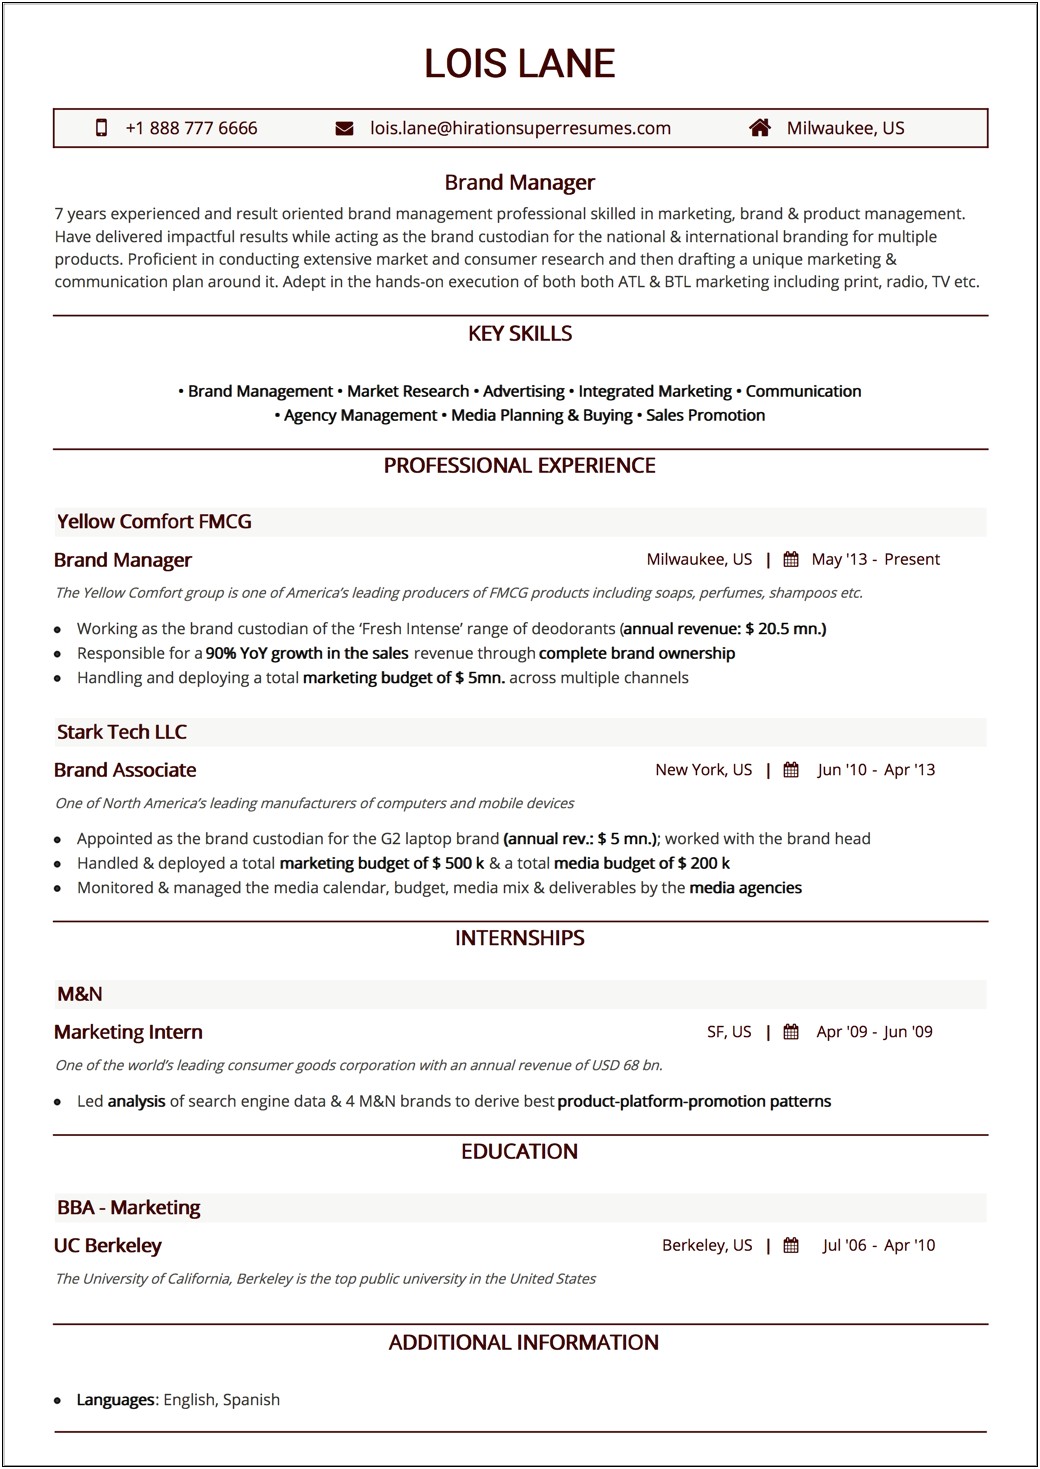 Resume Experience In Bullet Points Or Paragraph